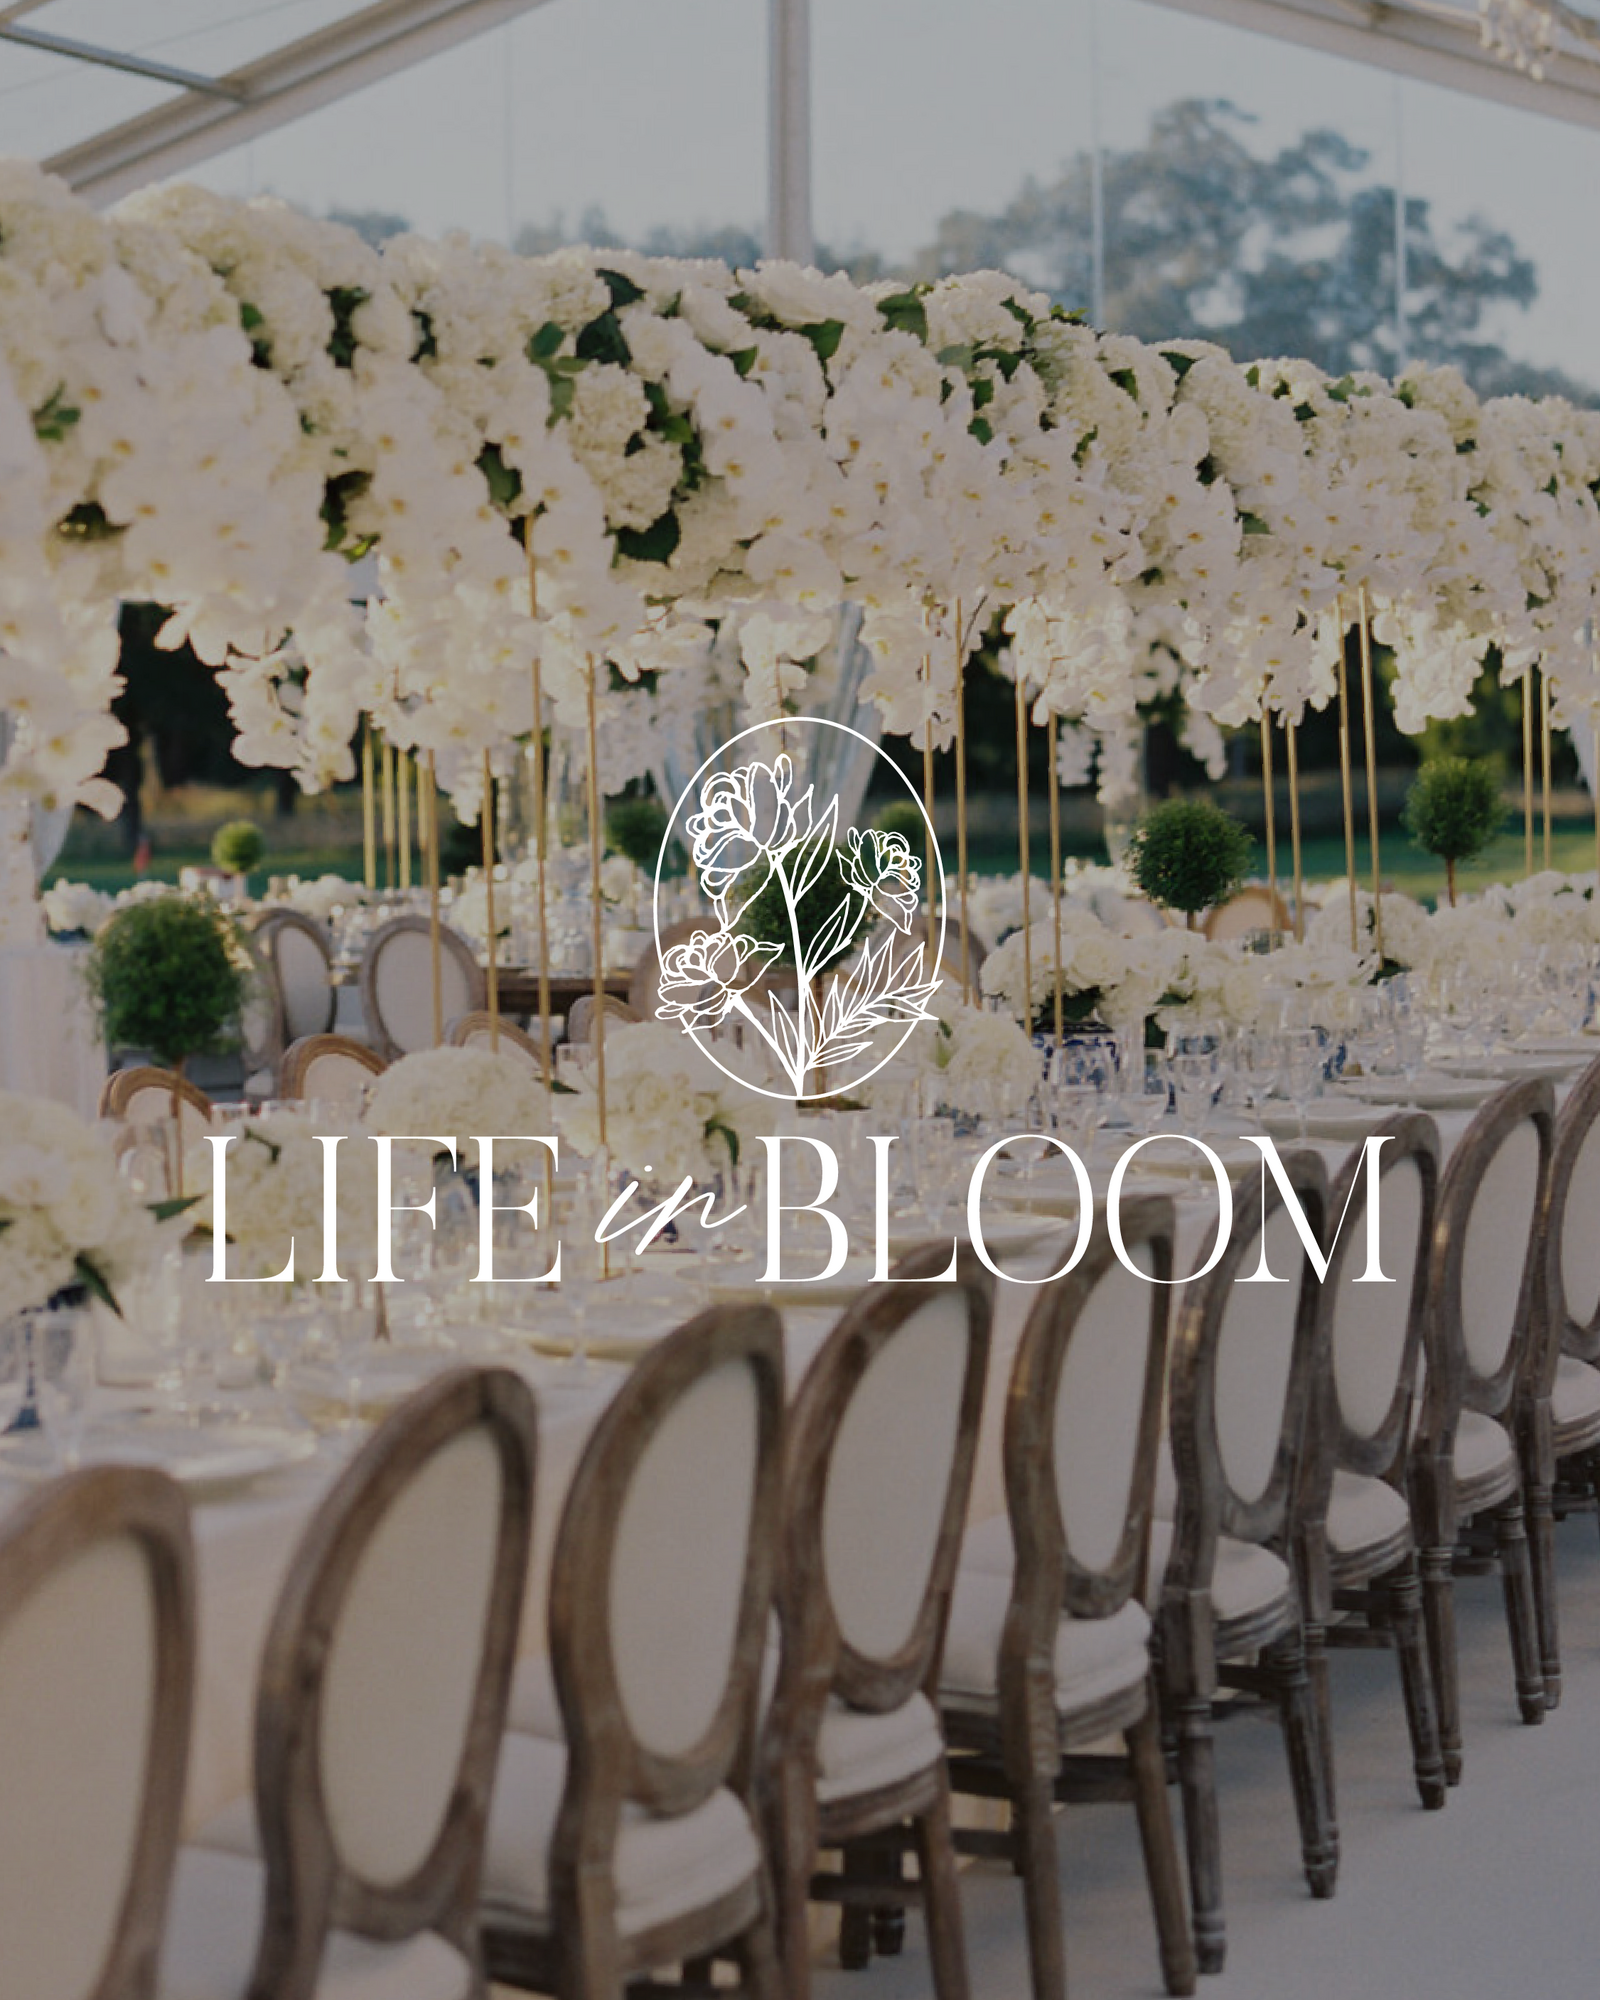 Life-in-bloom-Launch-Graphics-68